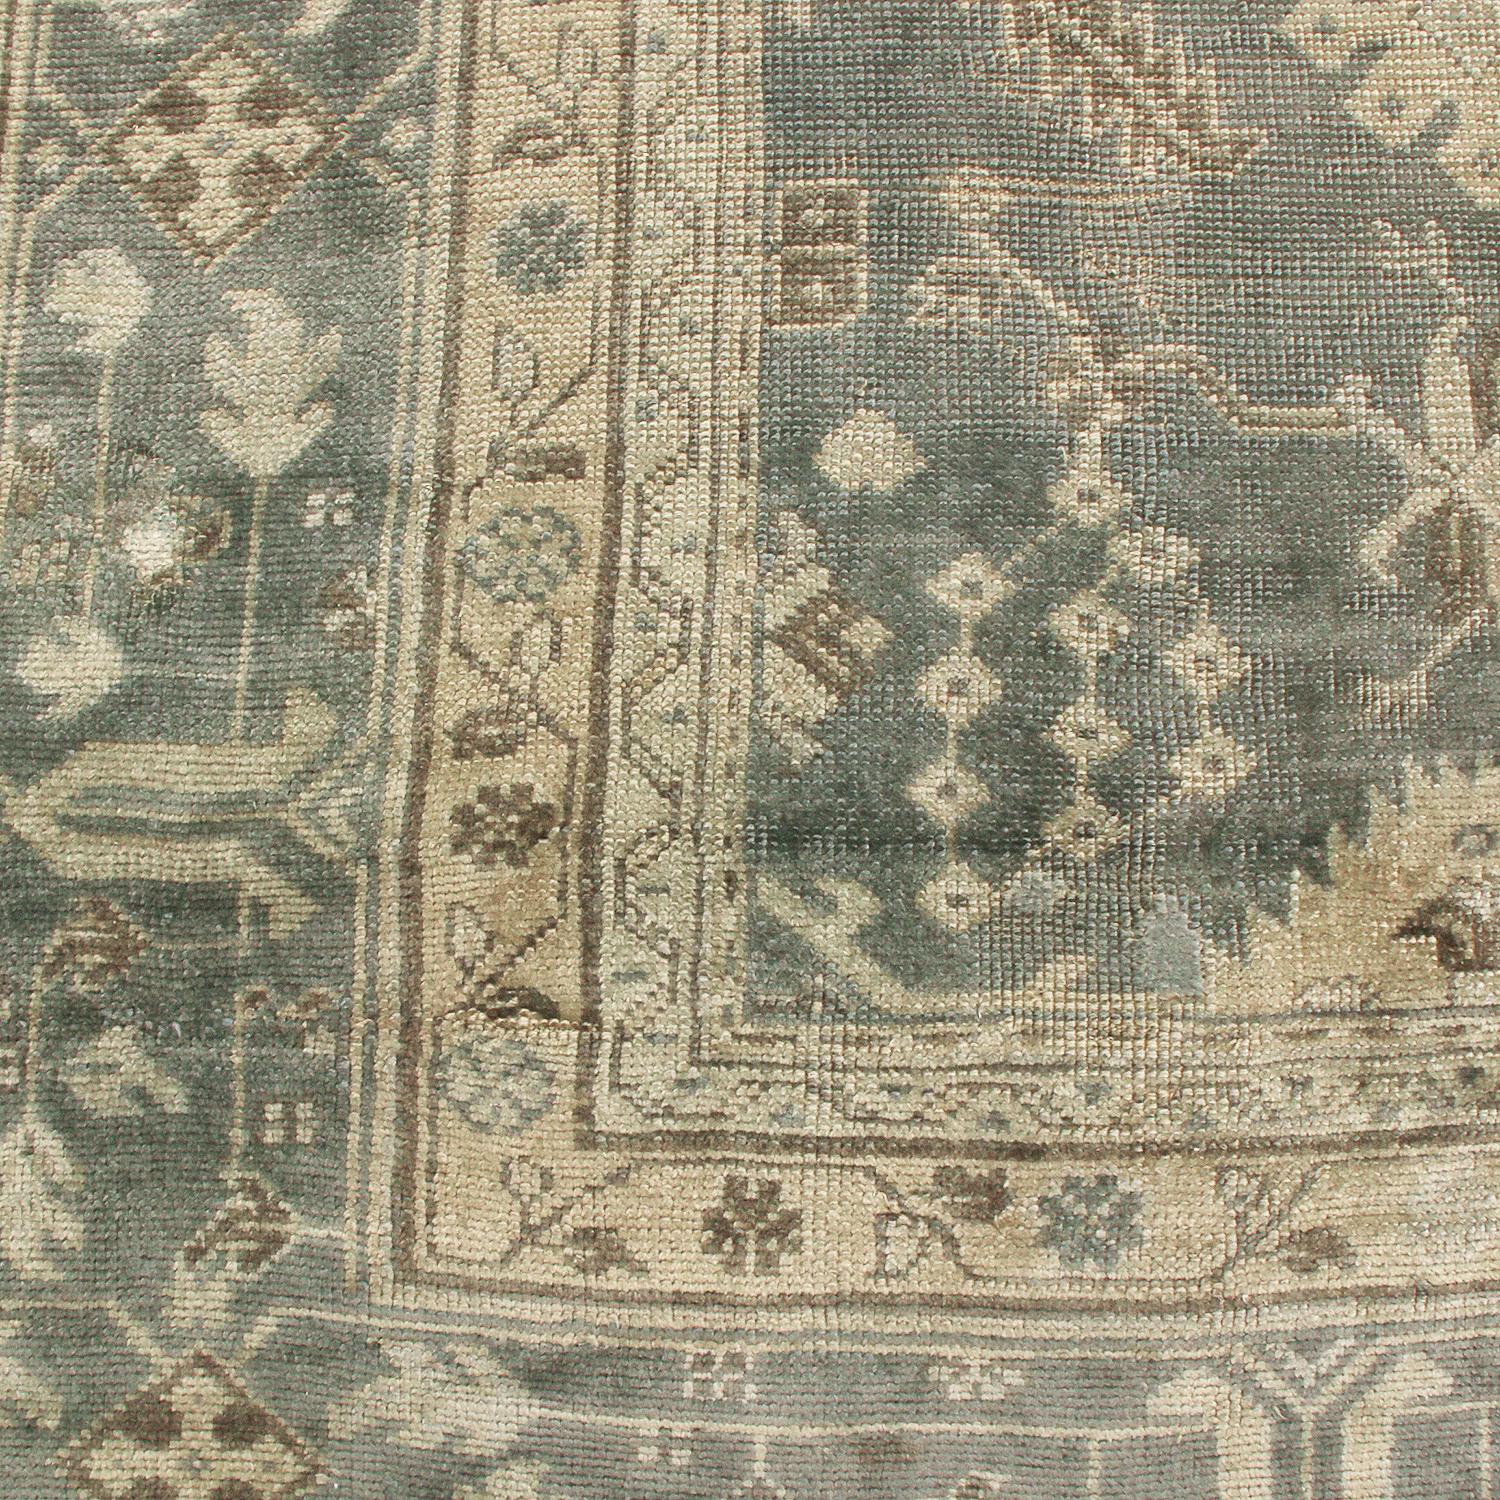 Hand-Knotted Antique Oushak Stone Blue and Tan Wool Rug